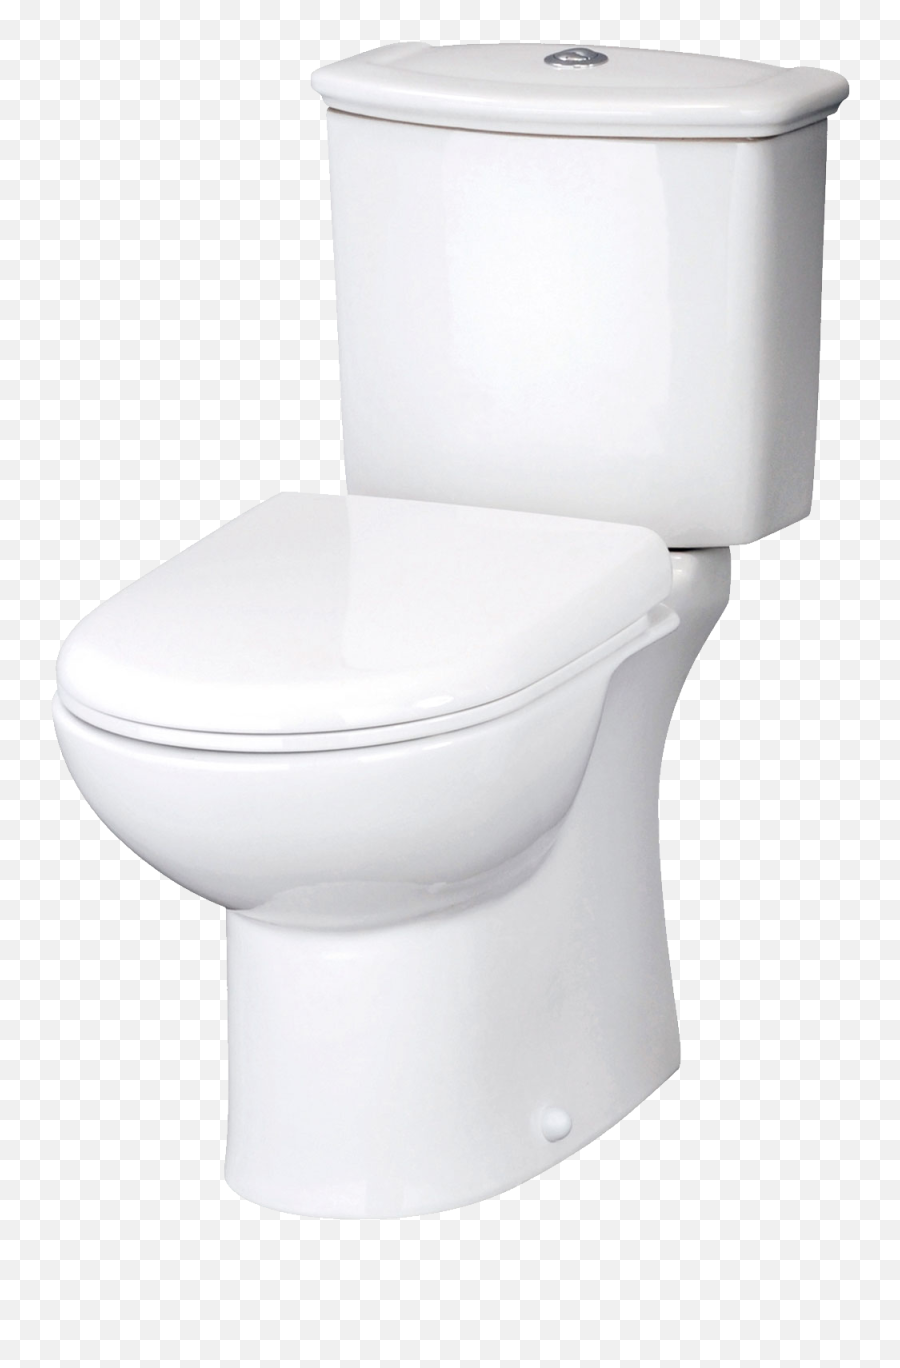 Toilet Black Background Png Image With - Toilet With Black Background,Toilet Png